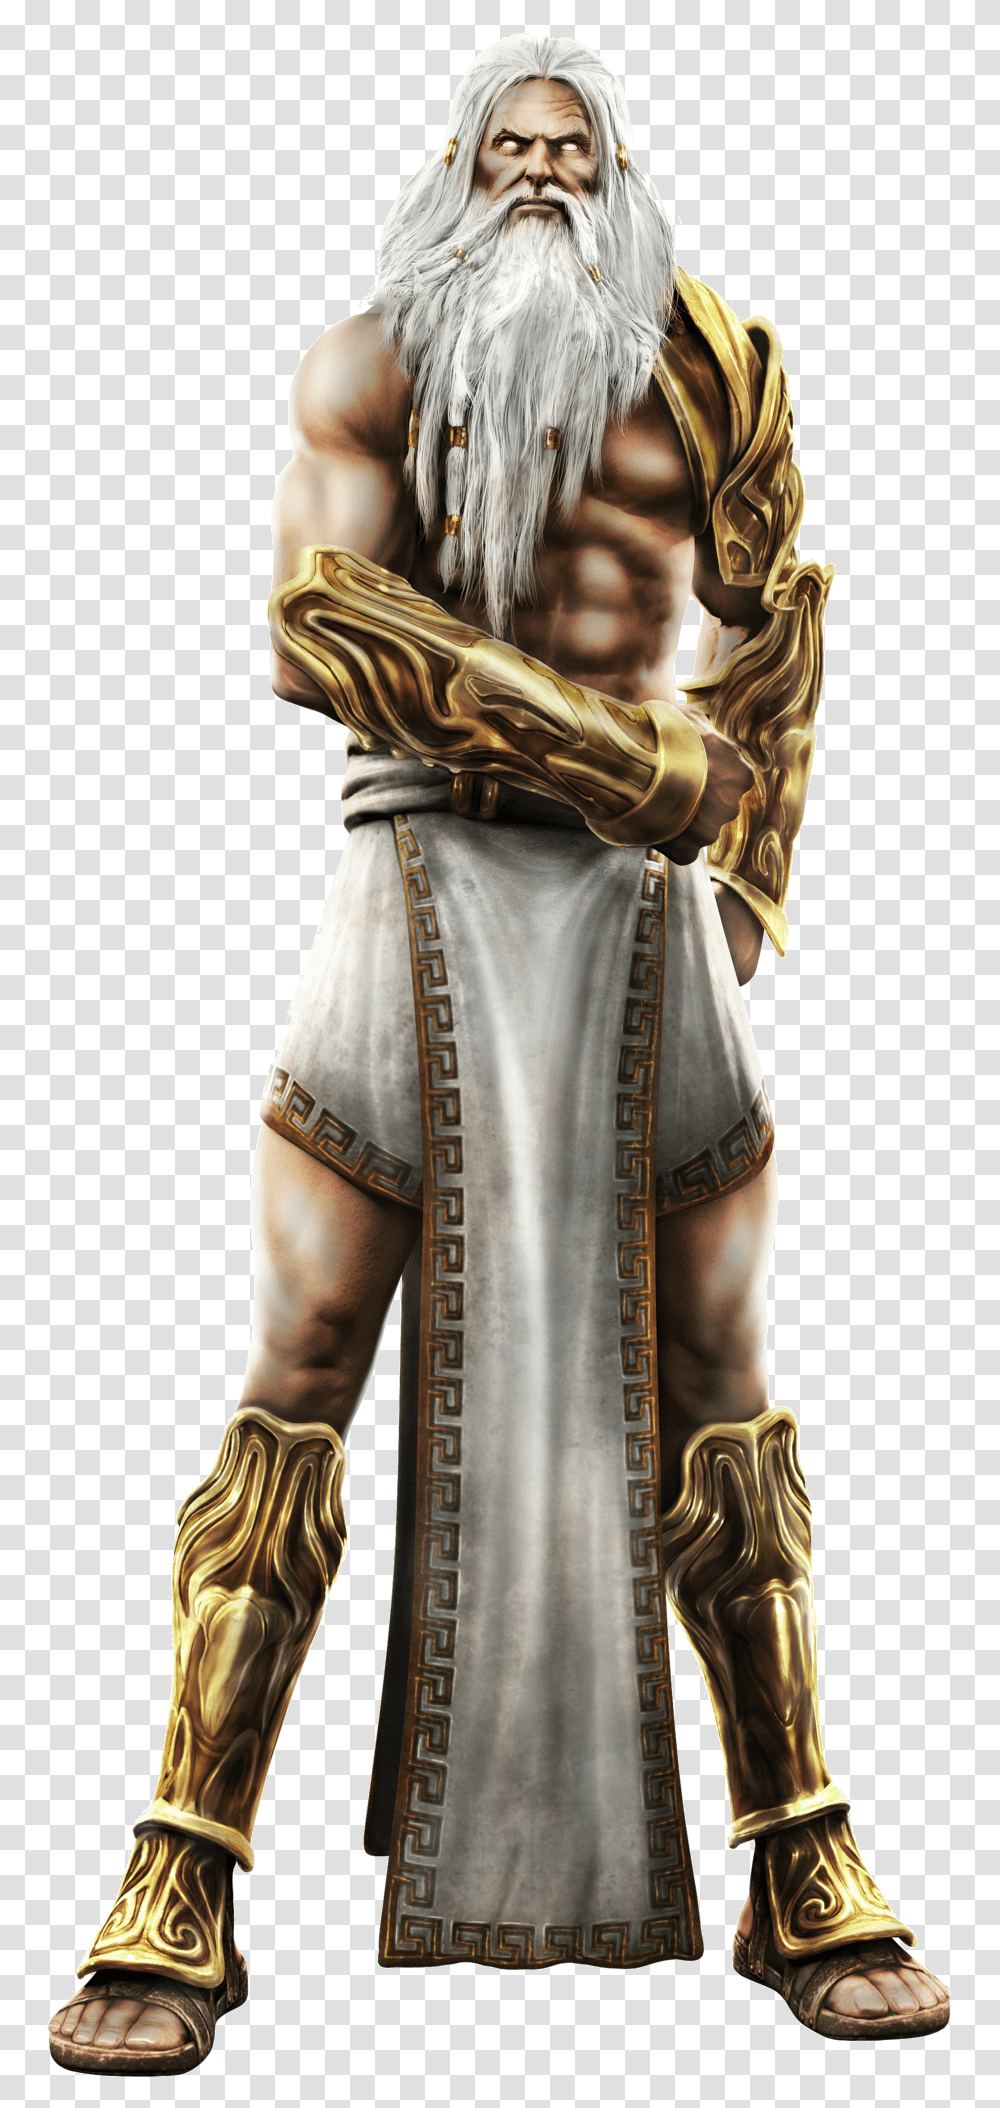 Playstation All Stars Zeus, Person, Armor, Figurine Transparent Png